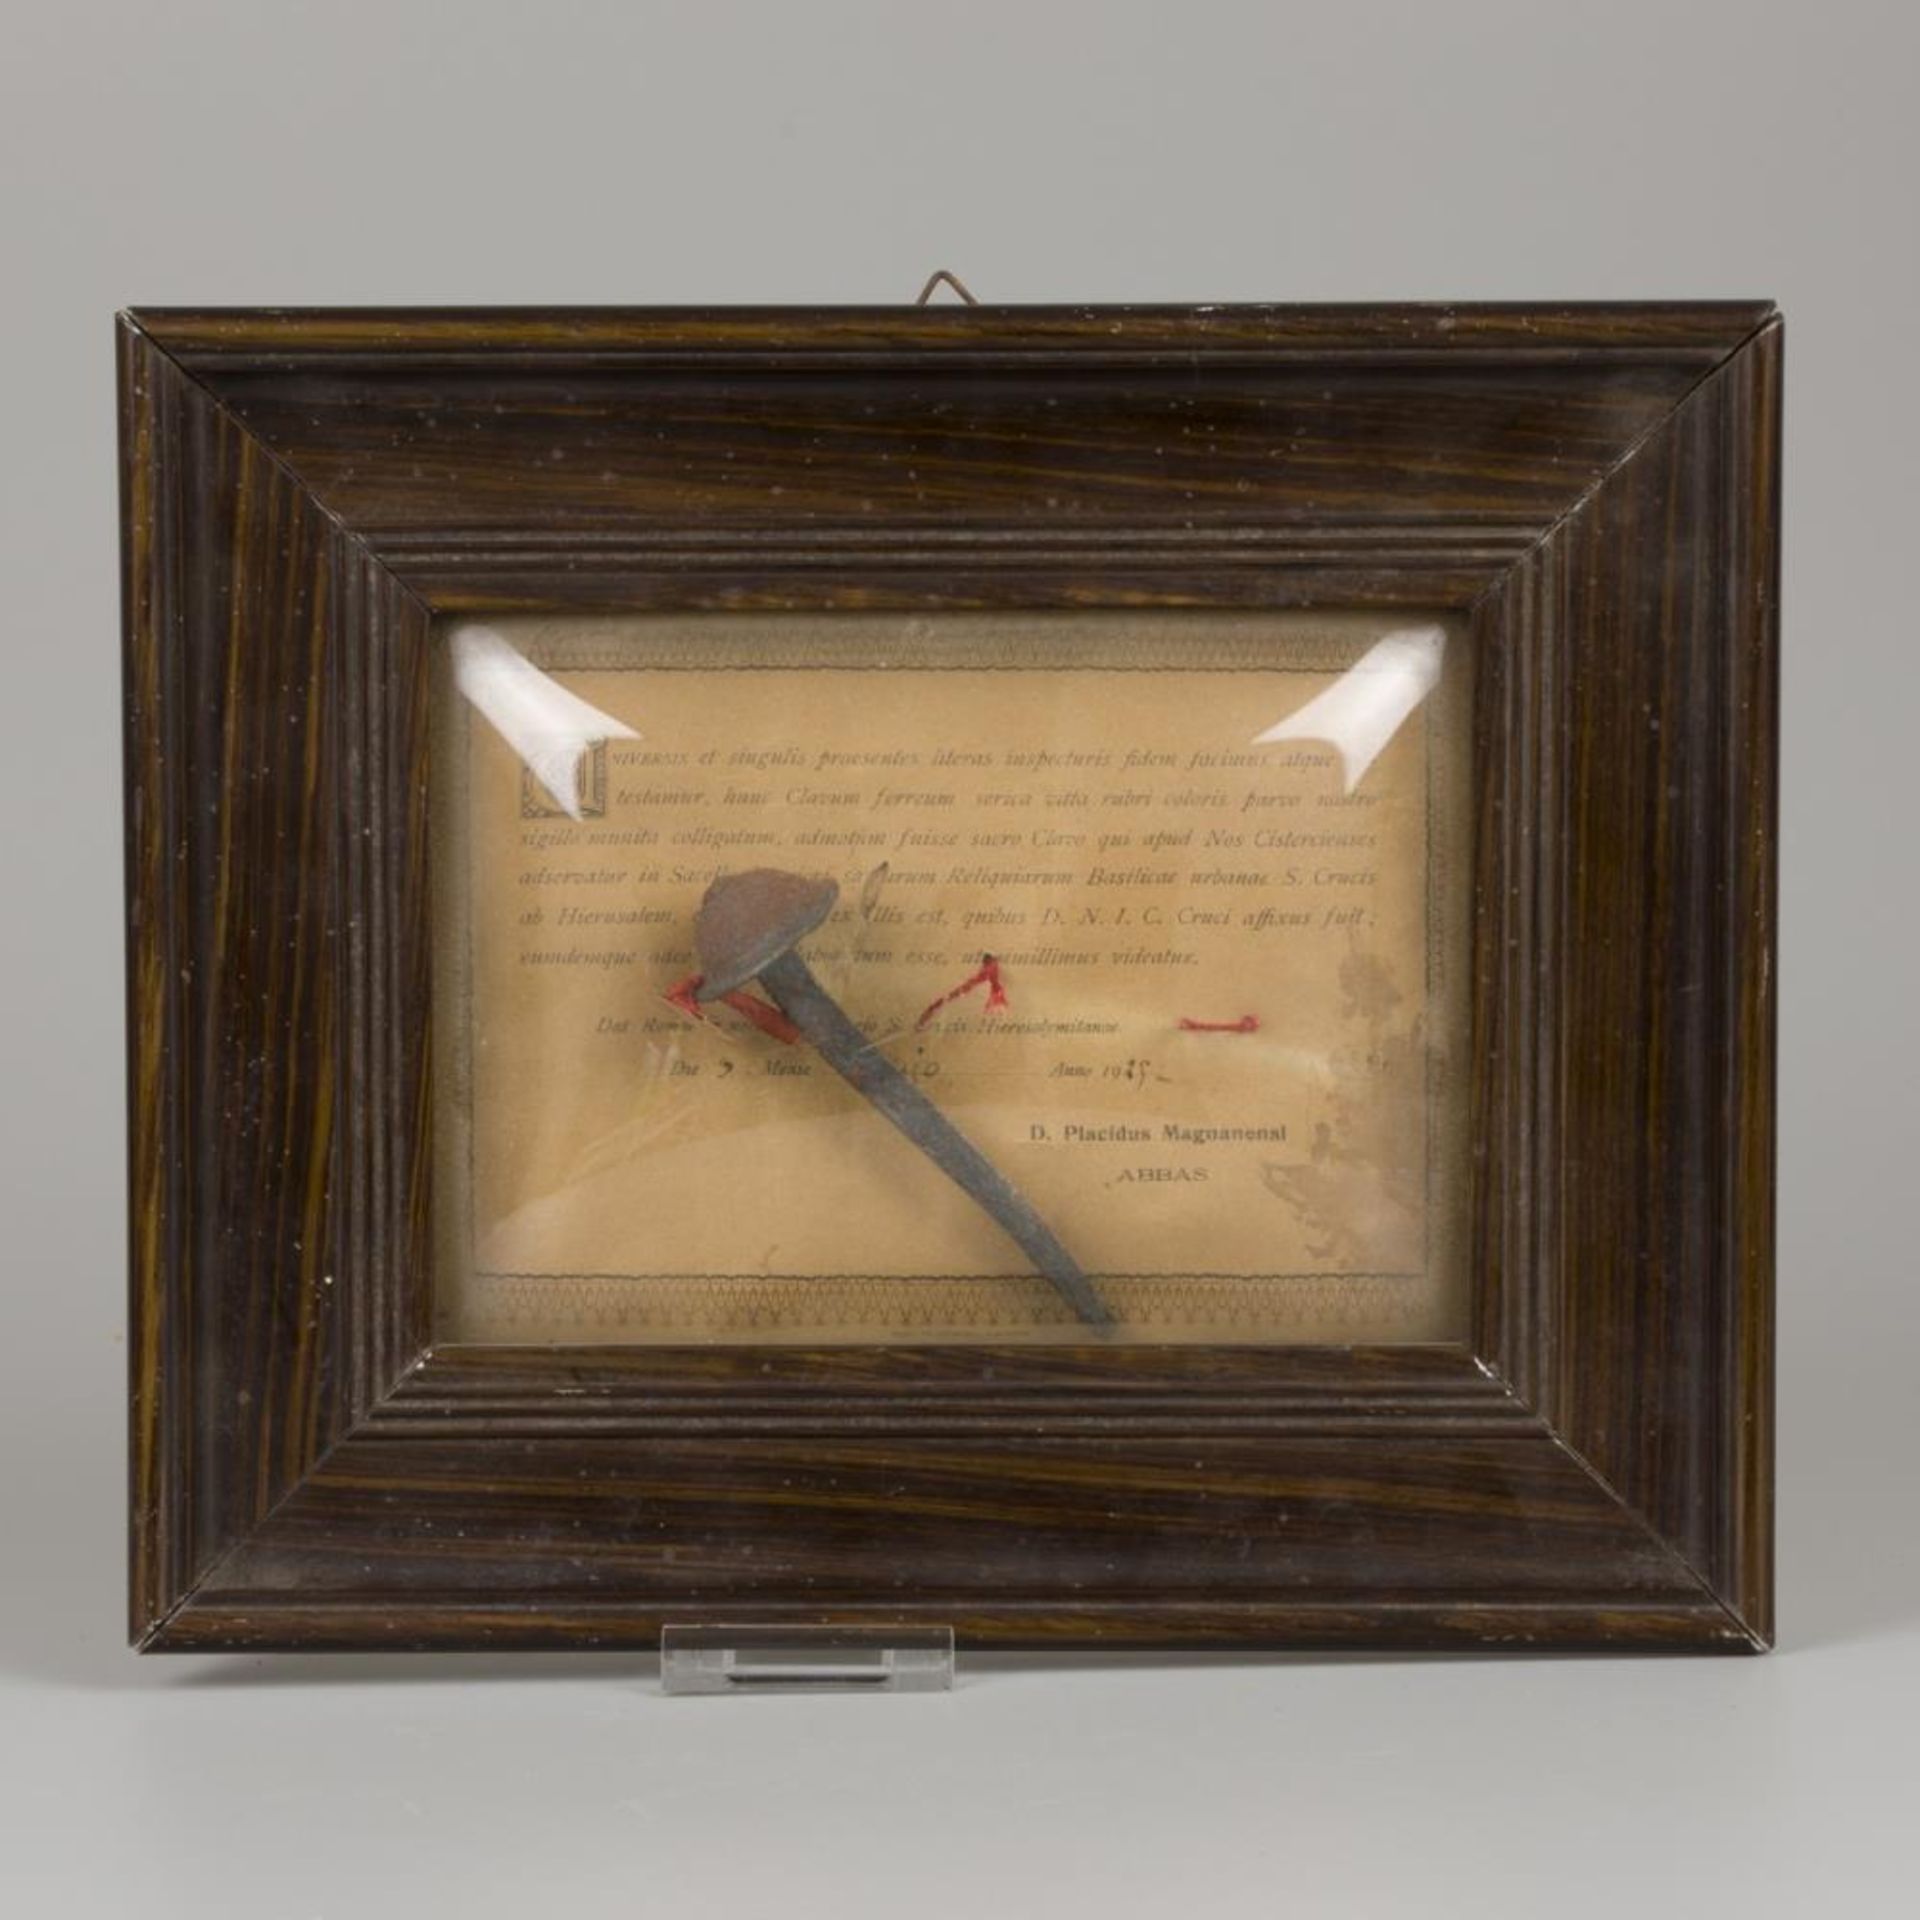 A relic of the crucifixion of Christ (iron nail), with certificate (dated 1925).